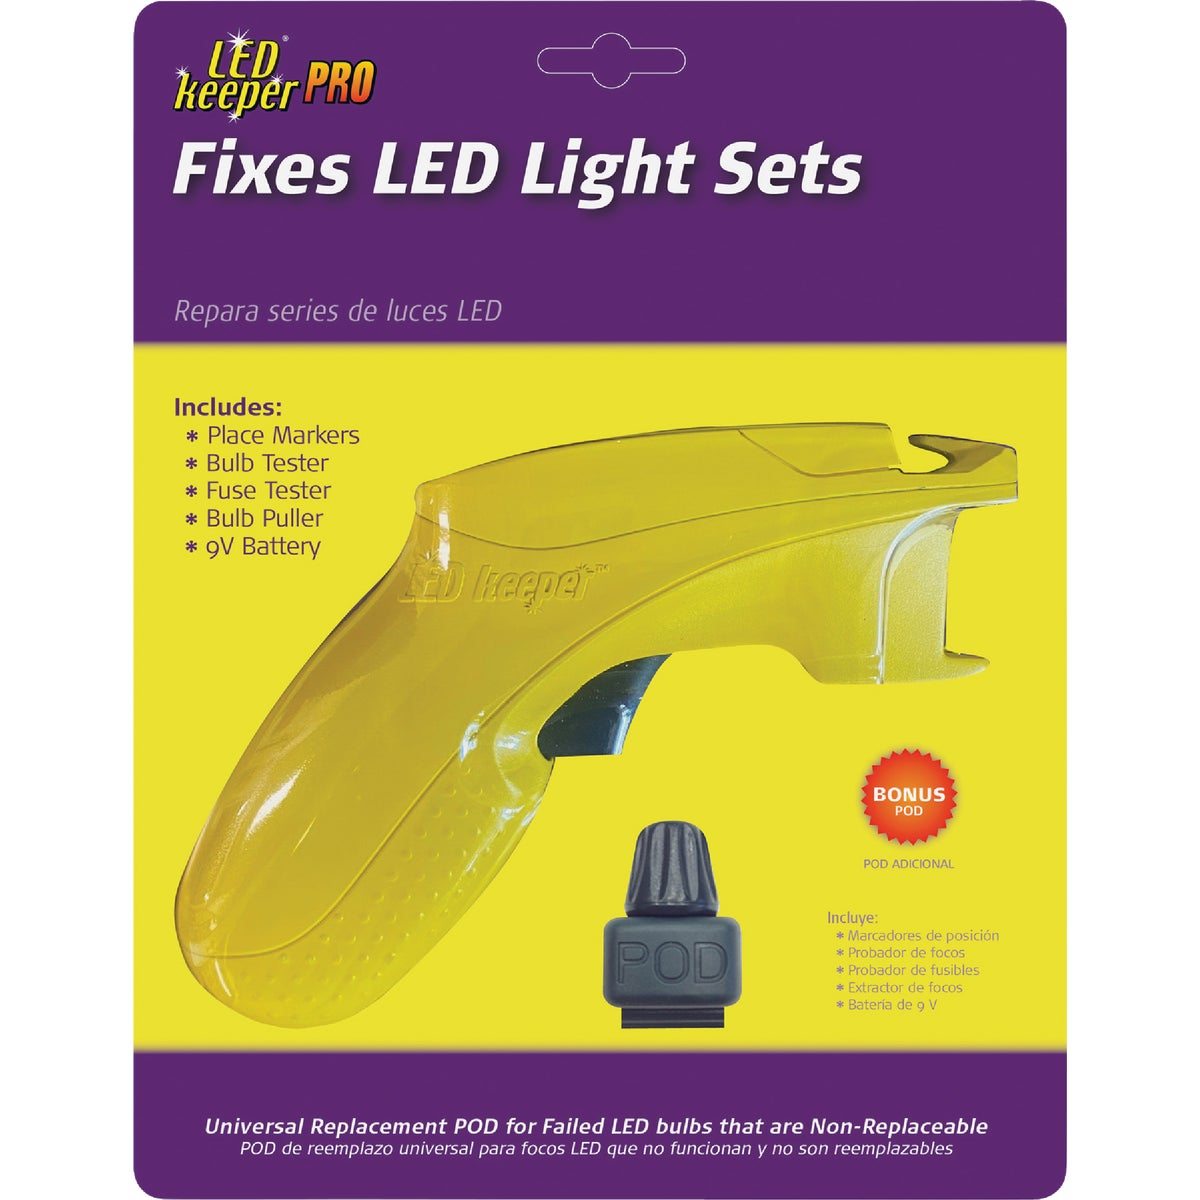 Item 900045, LED Keeper is a complete kit designed to diagnose and repair LED light sets